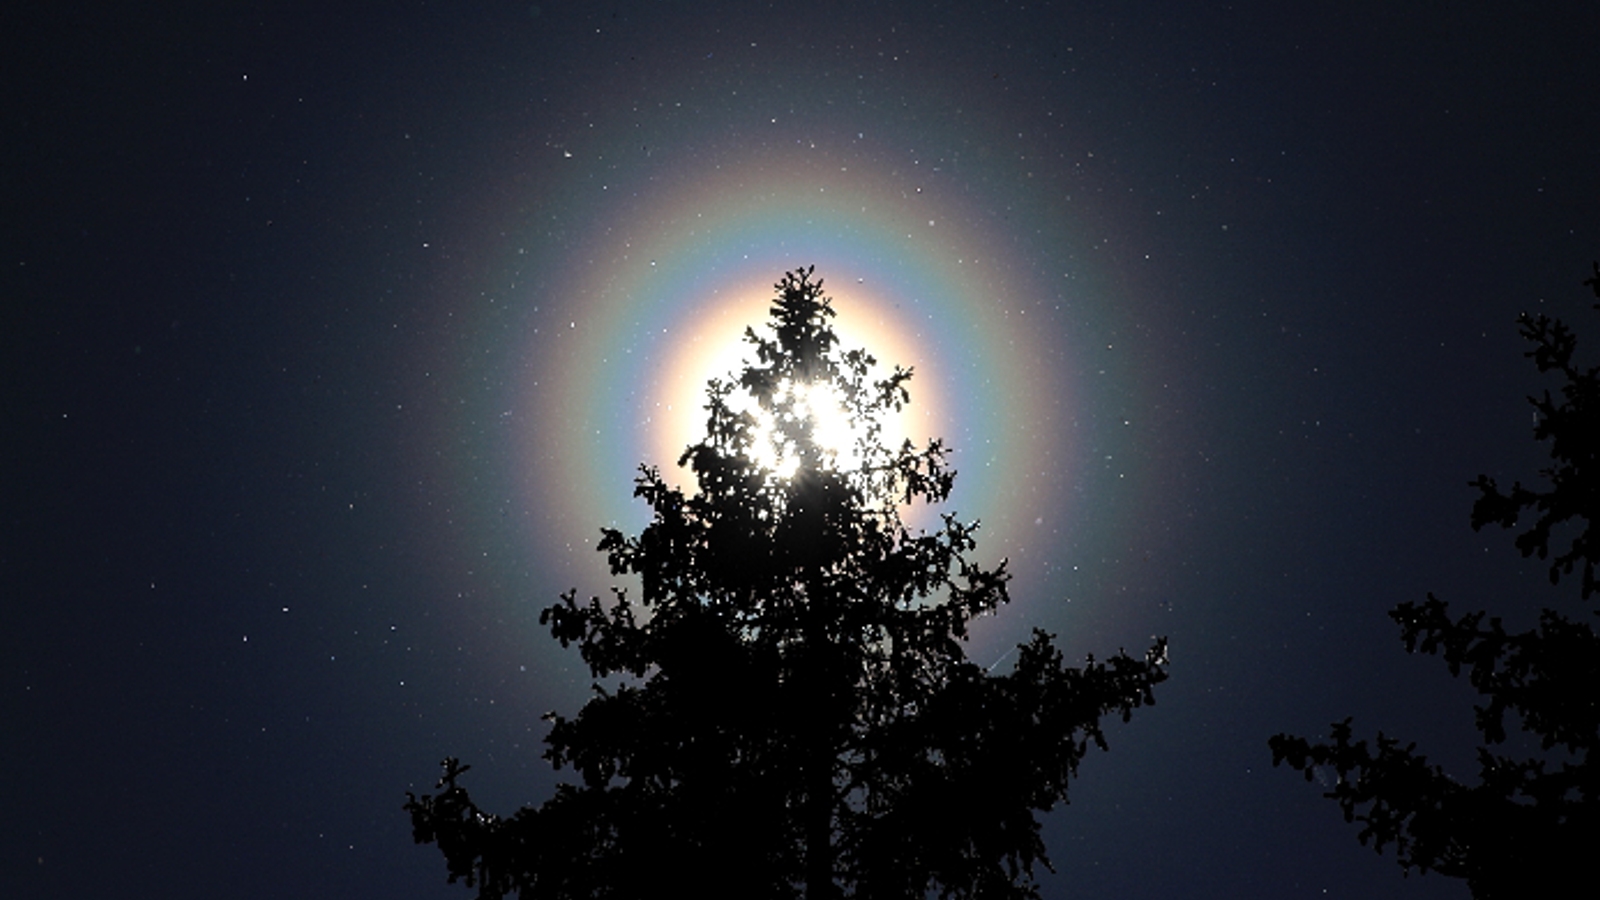 Rainbow rings surround the sun, which is half obscured by a pine tree